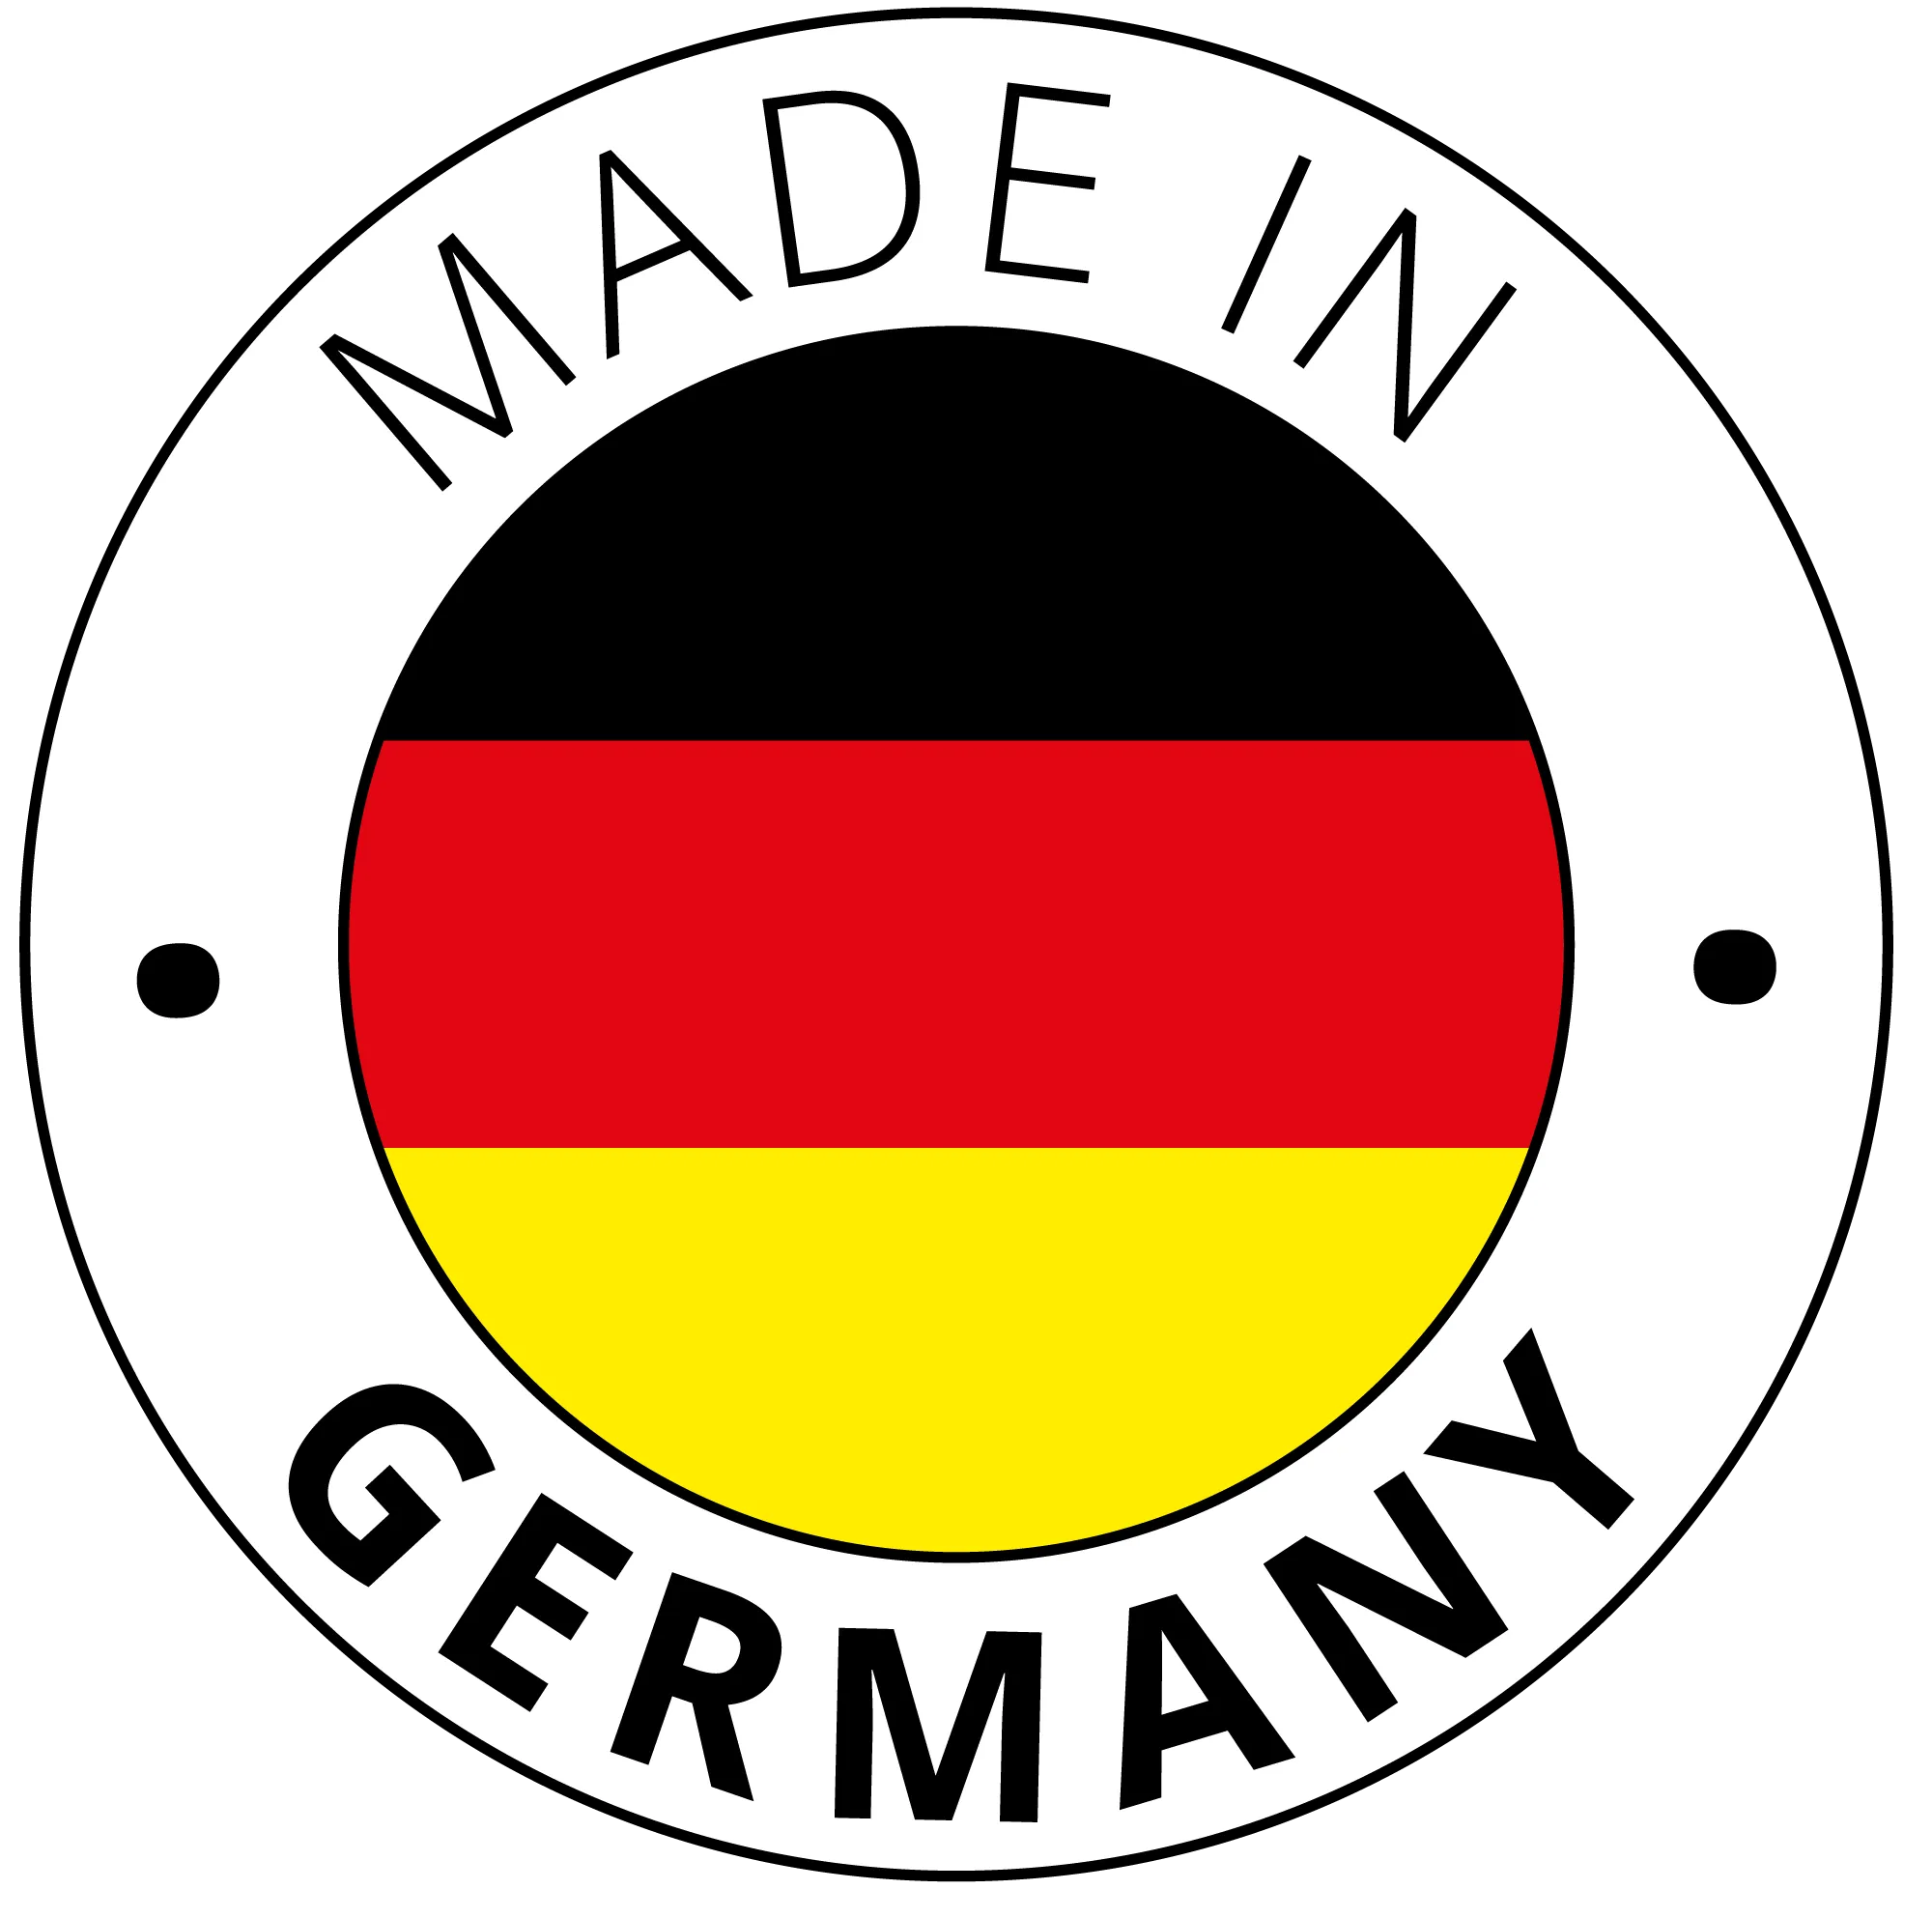 Made in Germany logo